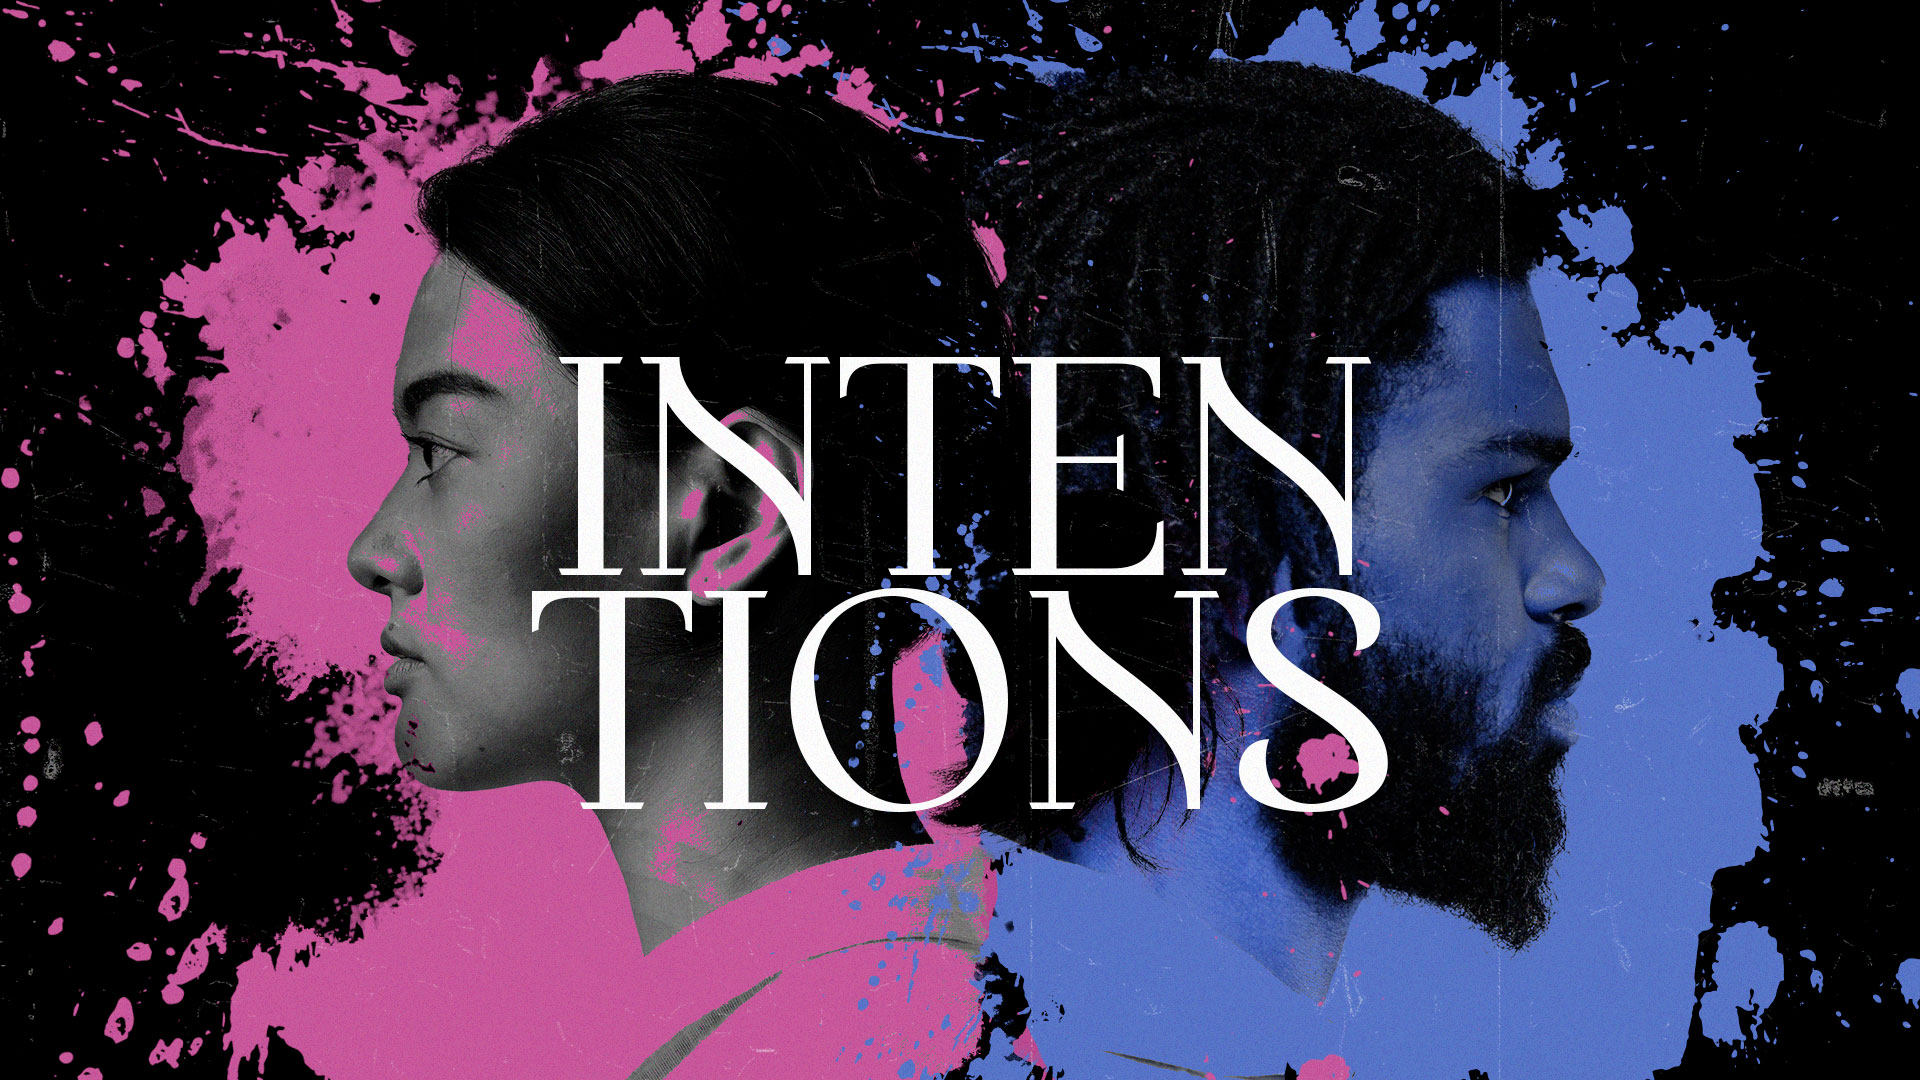    INTENTIONS: Rediscovering & Redefining Relationships